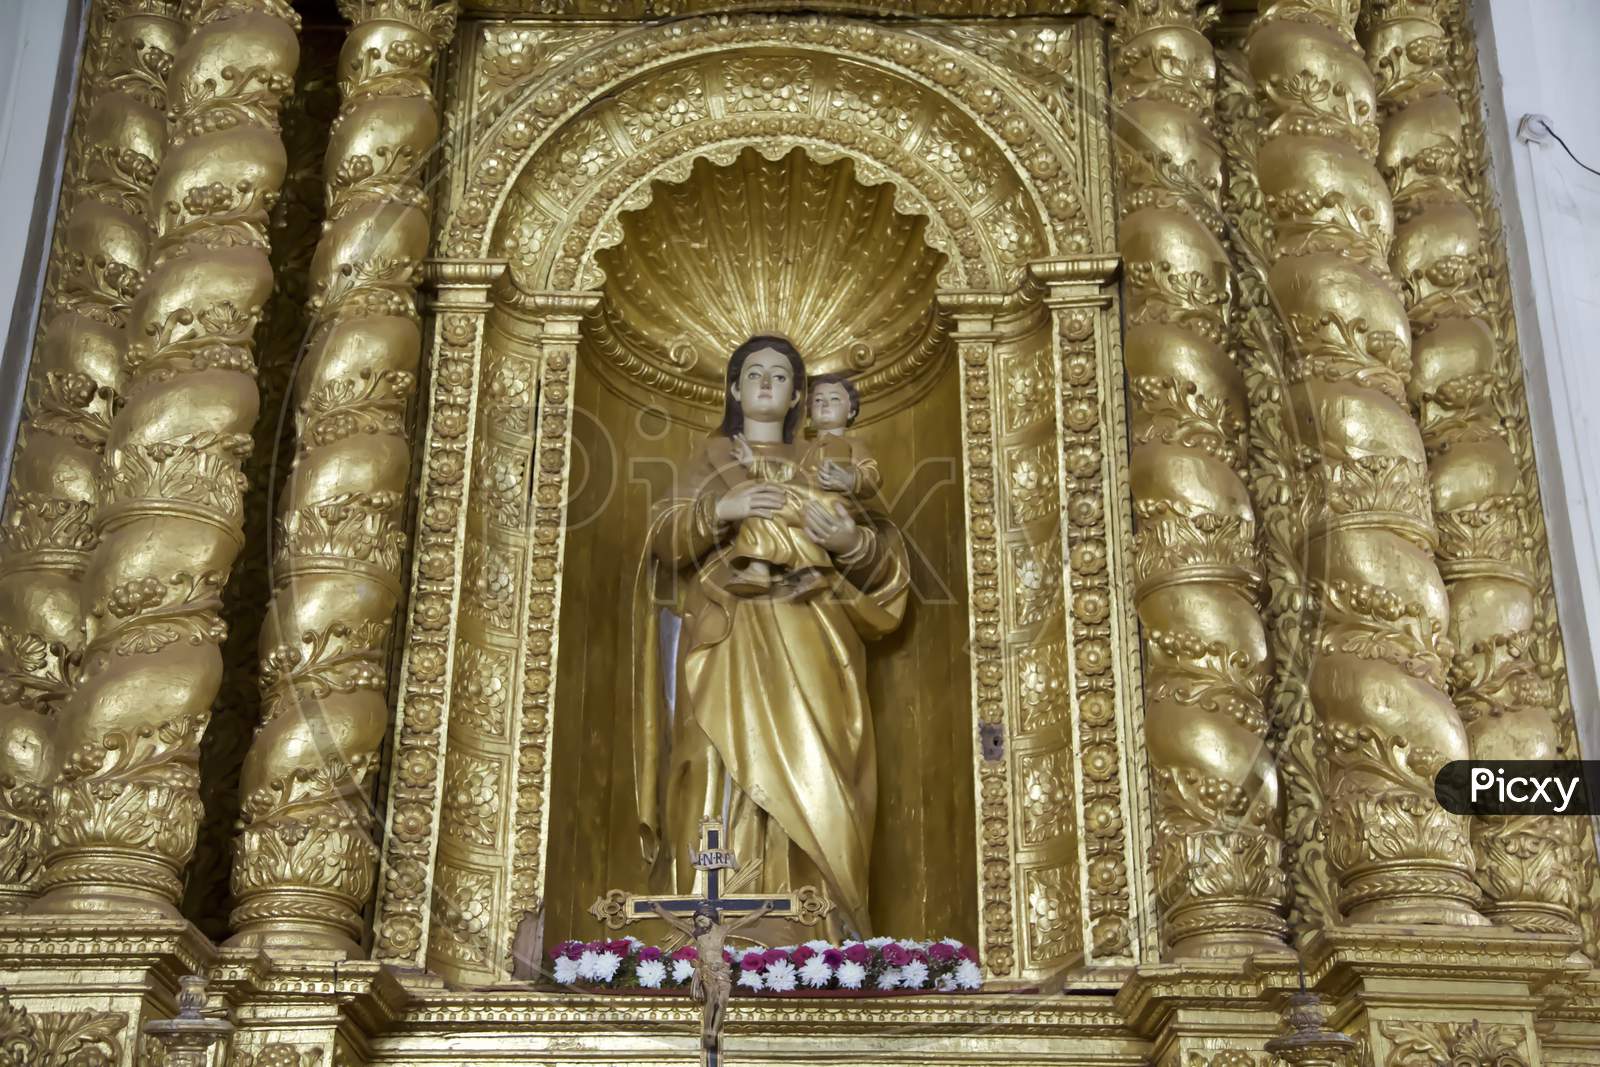 Statue Of Our Lady. A Golden Statue Of The Virgin Mary Inside The Basilica Of Bom Jesus, Goa.India